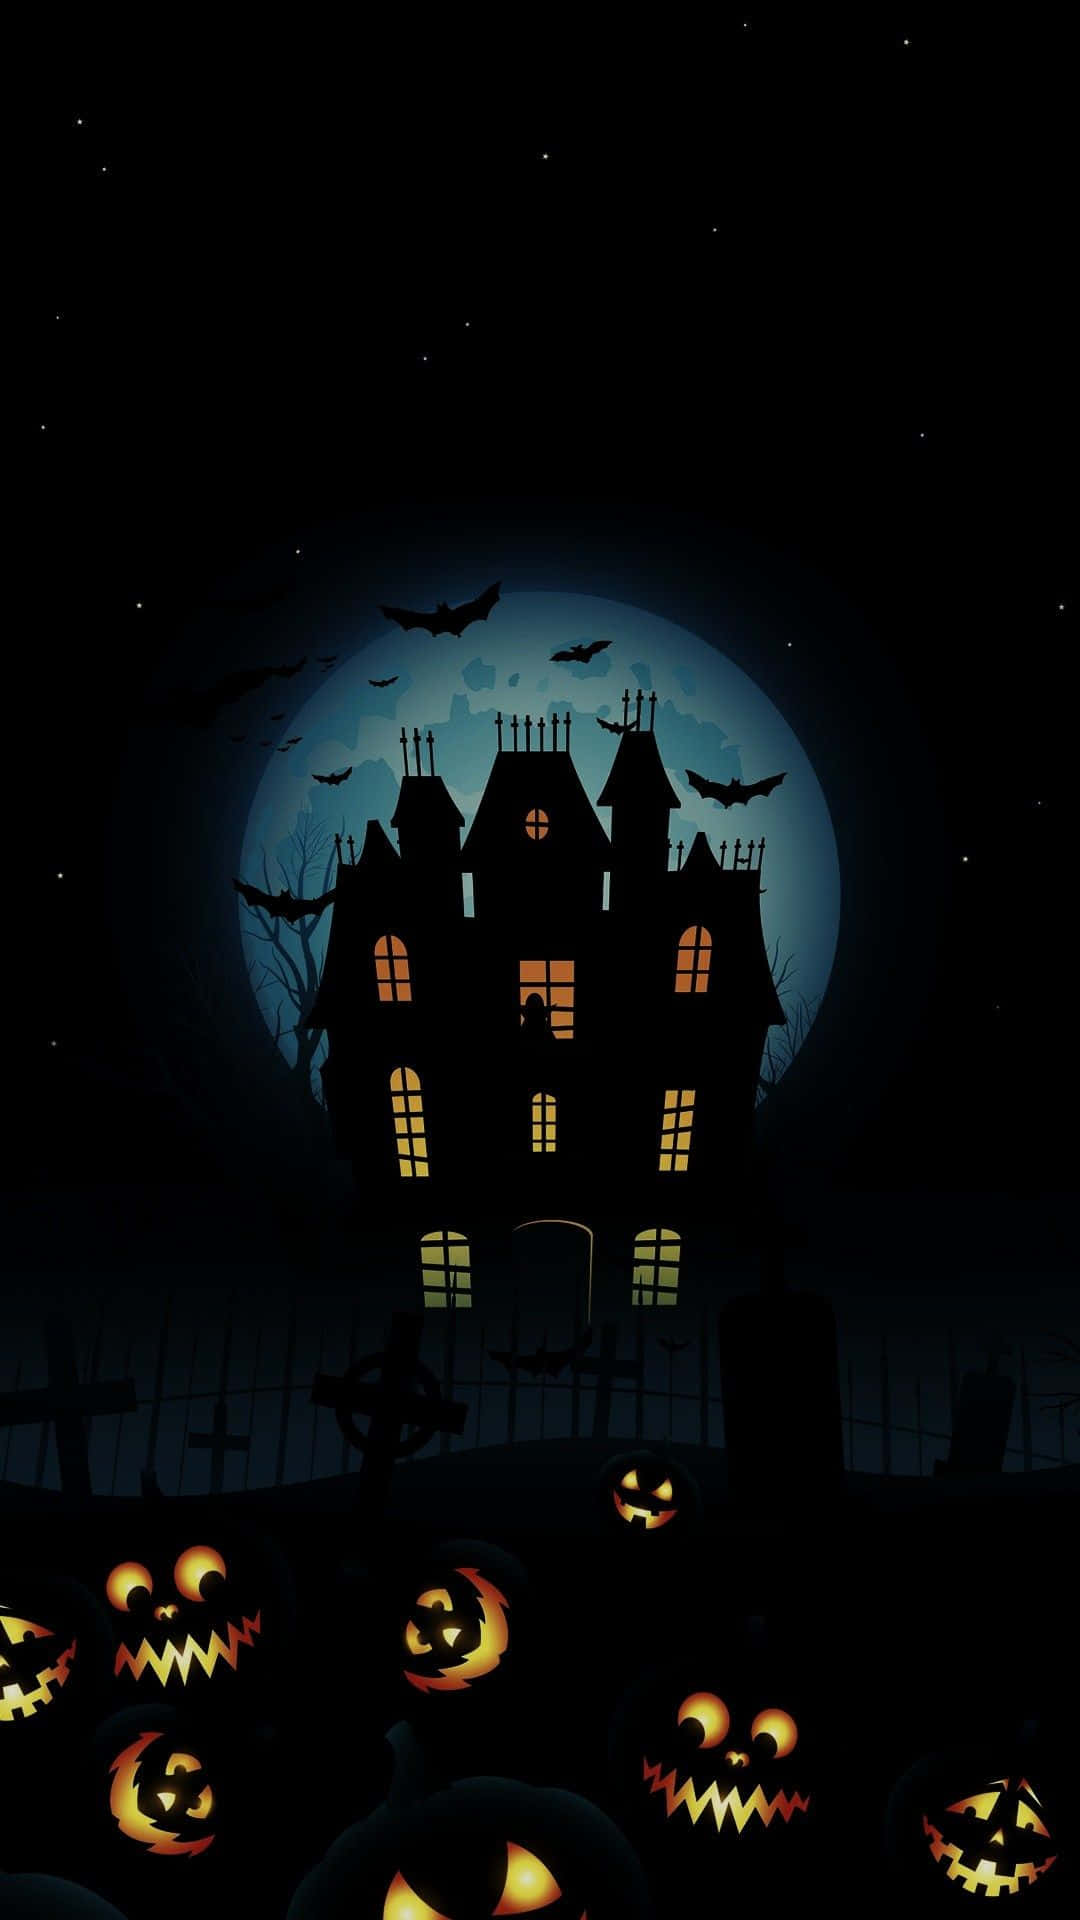 Get Ready for Halloween with this Spooky iPhone Wallpaper